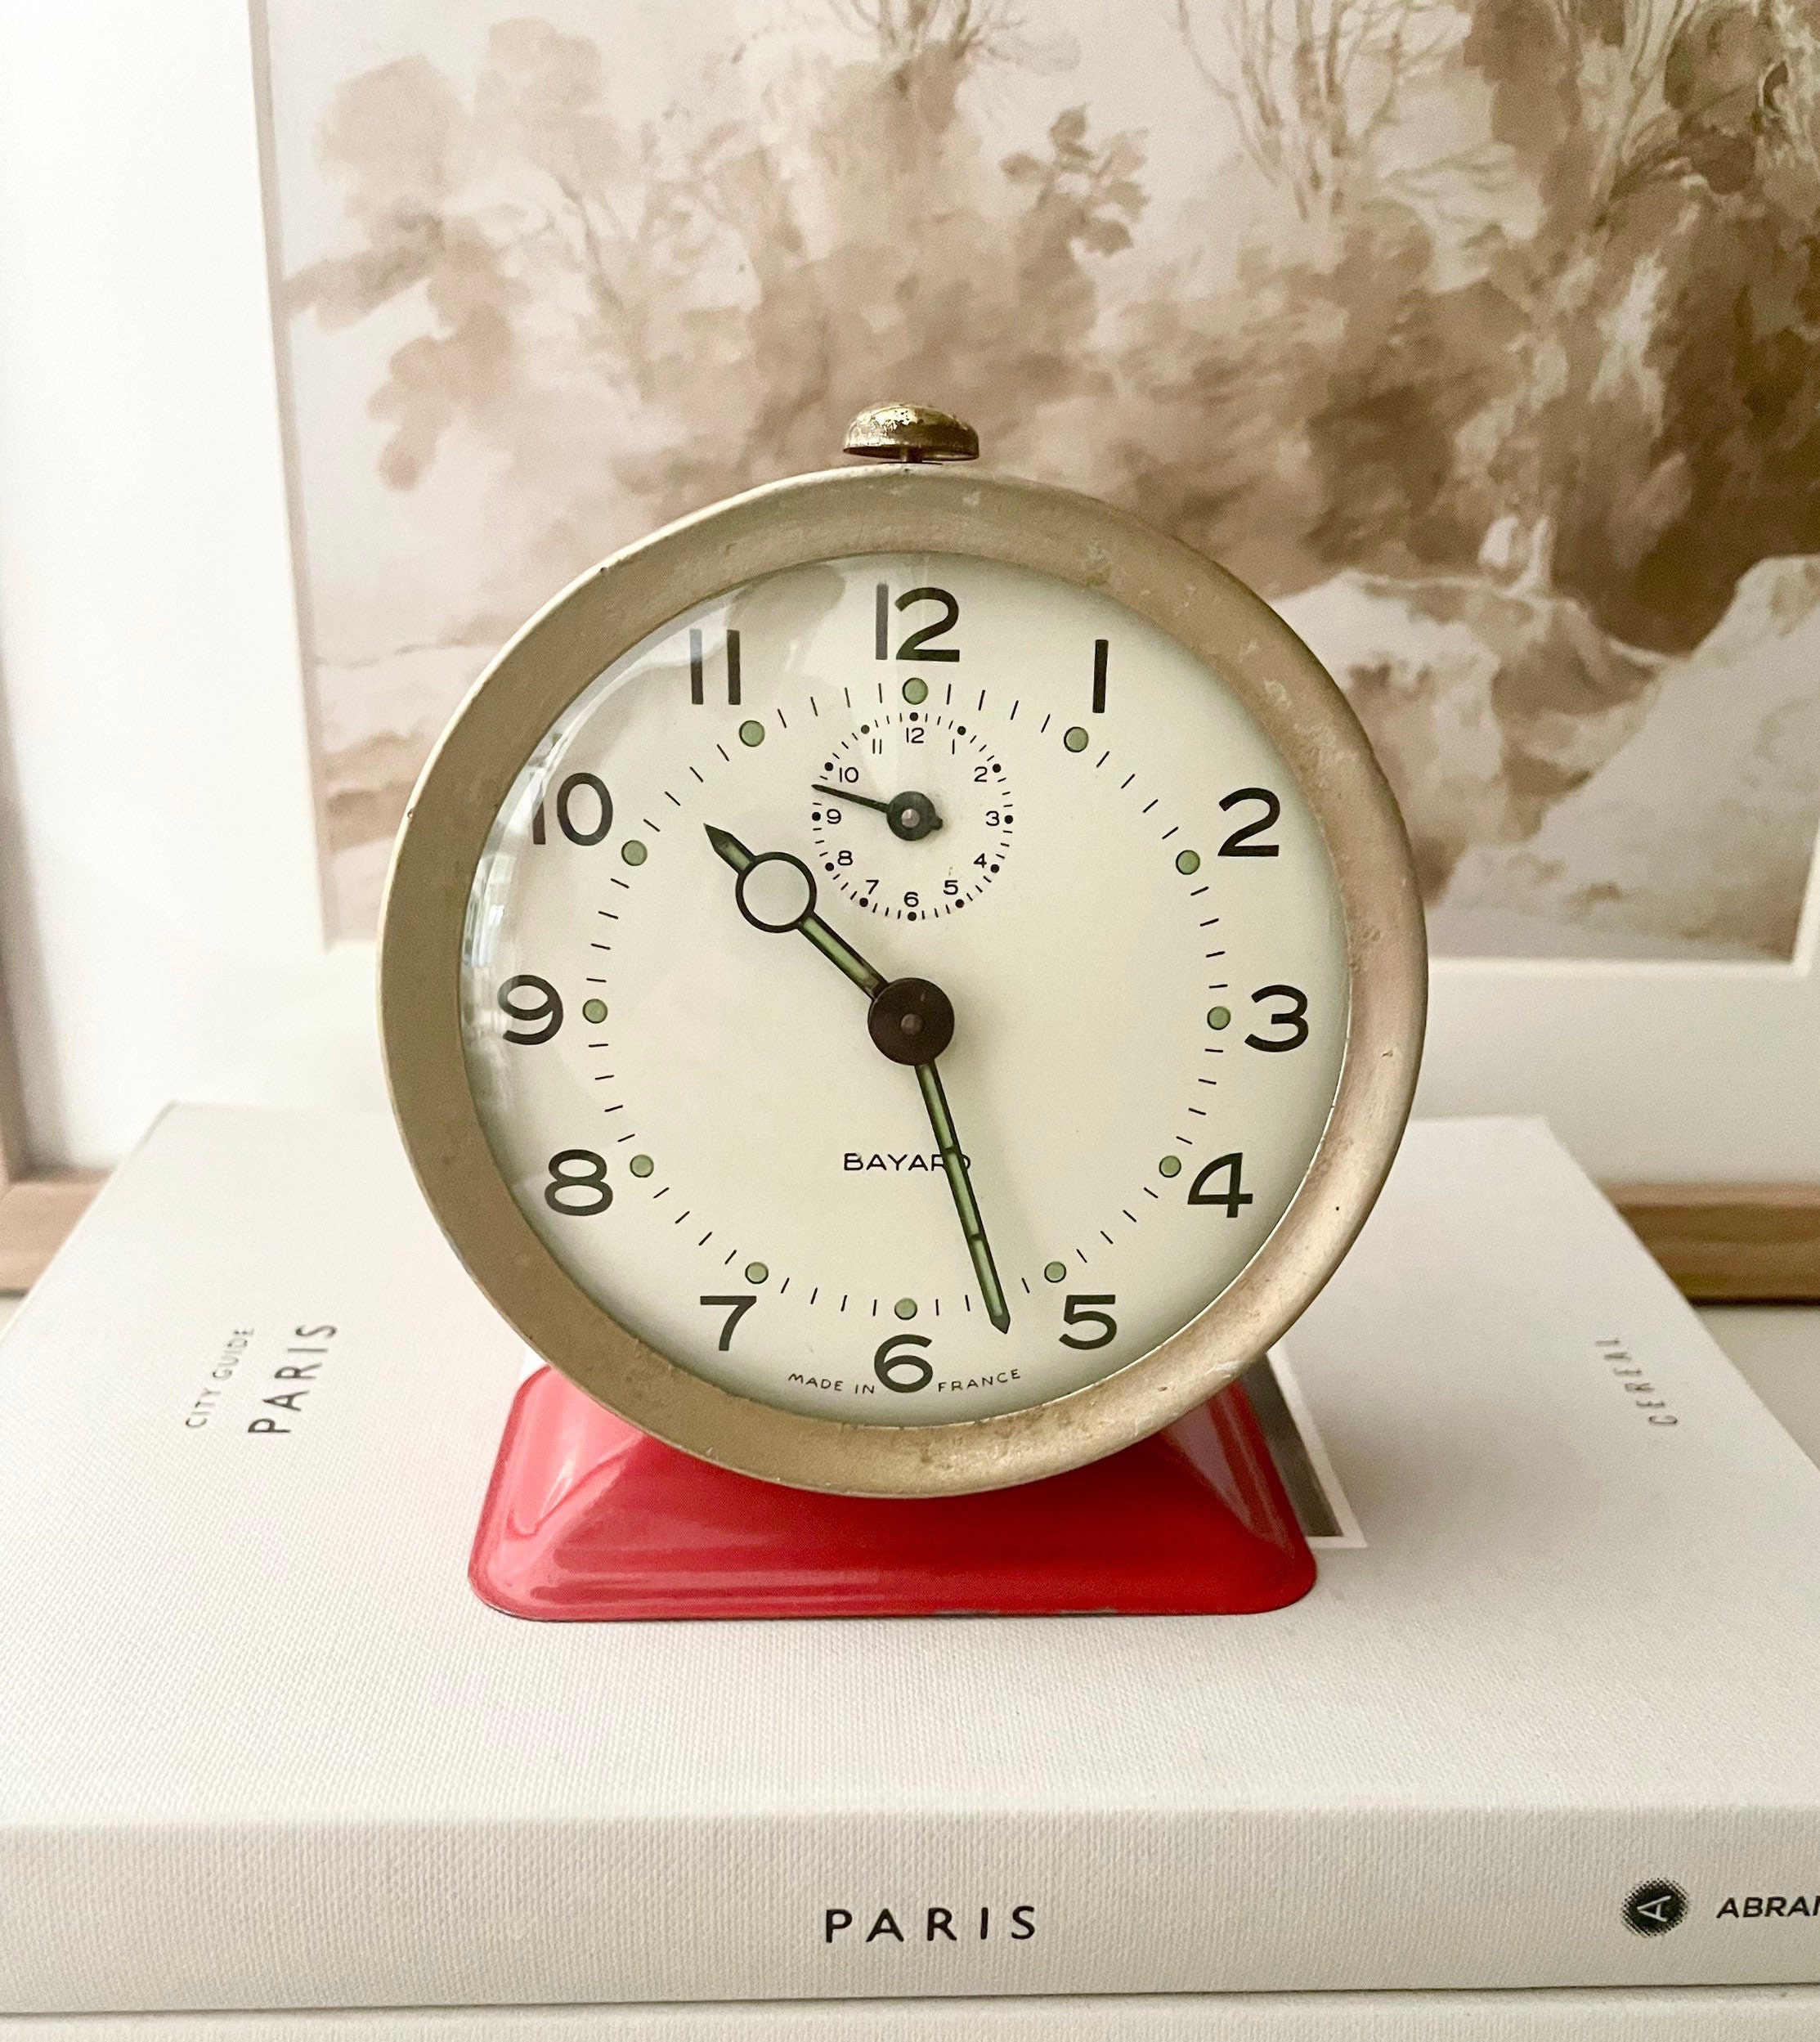 Analog Alarm Clock 4 inch Twin Bell Vintage Red Silent Non-Ticking Quartz Battery Operated Extra Loud with Backlight for Bedside Table Desk, Retro